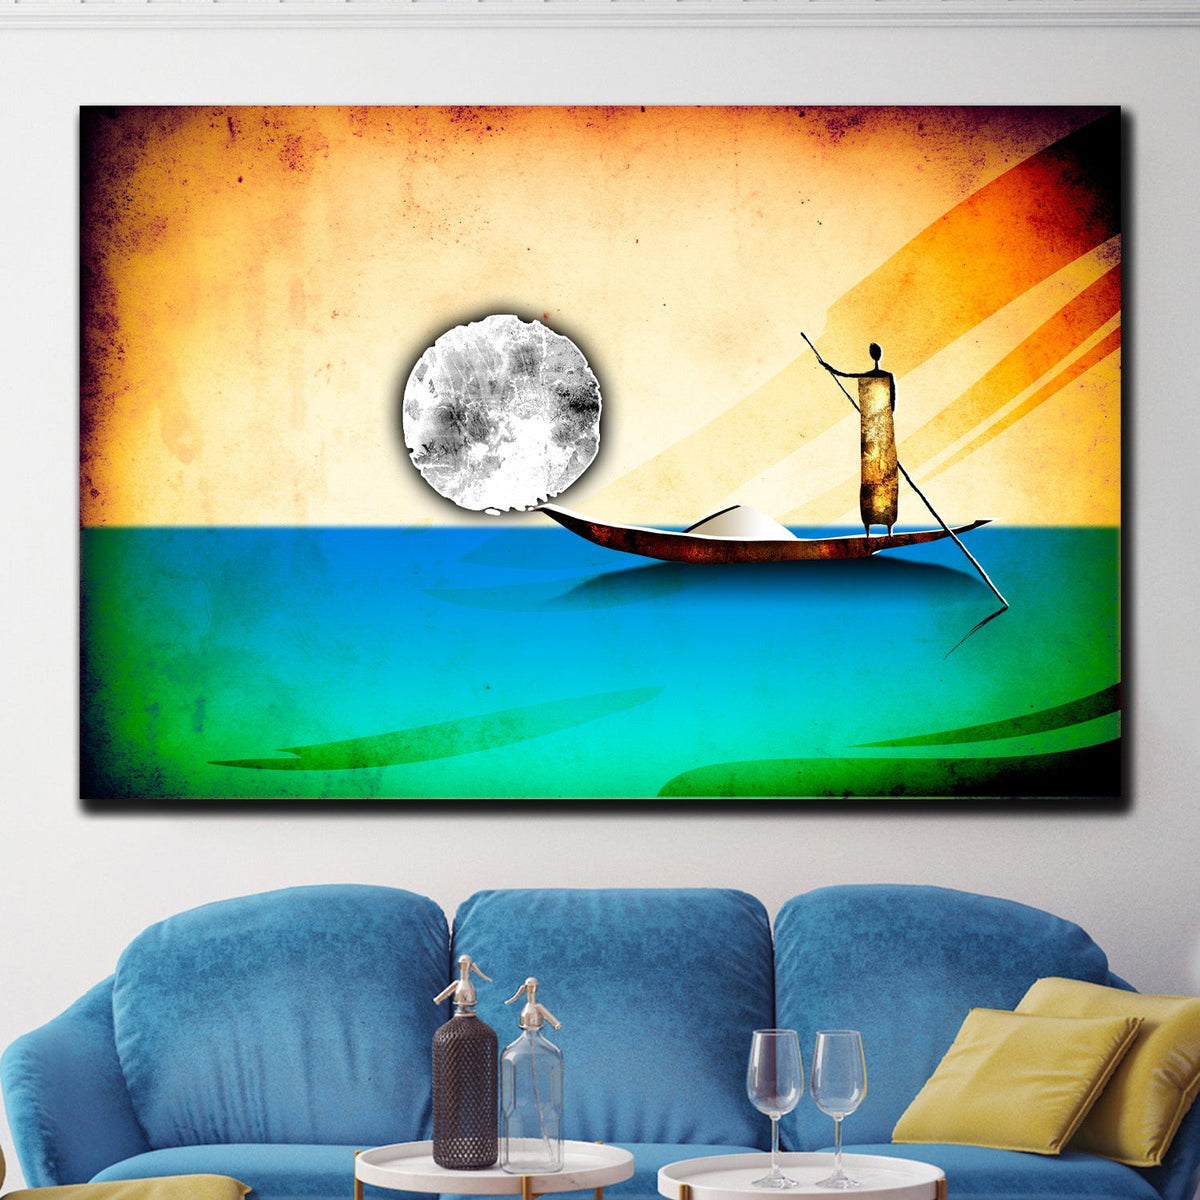 https://cdn.shopify.com/s/files/1/0387/9986/8044/products/TheBoatmanCanvasArtprintStretched-3.jpg